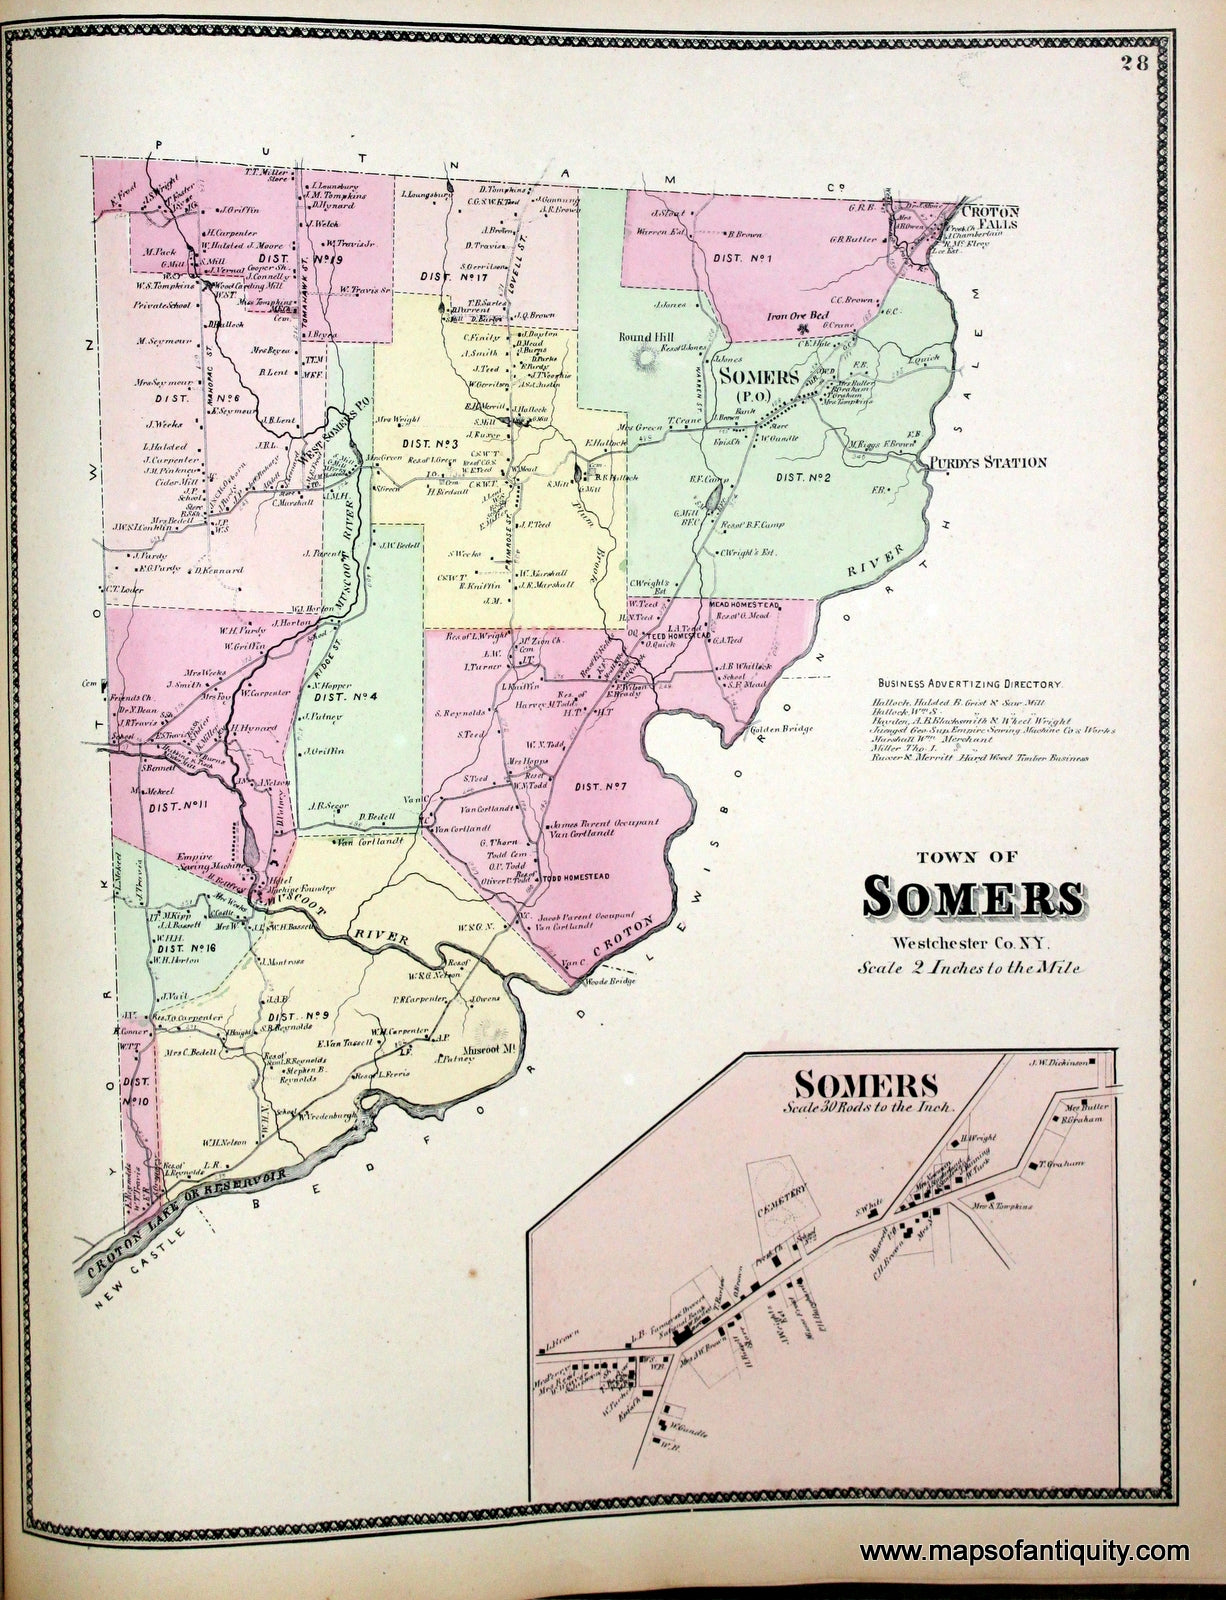 Antique-Hand-Colored-Map-Town-of-Somers-Westchester-Co.-N.Y.-(with-inset-closer-view-of-Somers)-United-States-Northeast-1867-Beers-Maps-Of-Antiquity